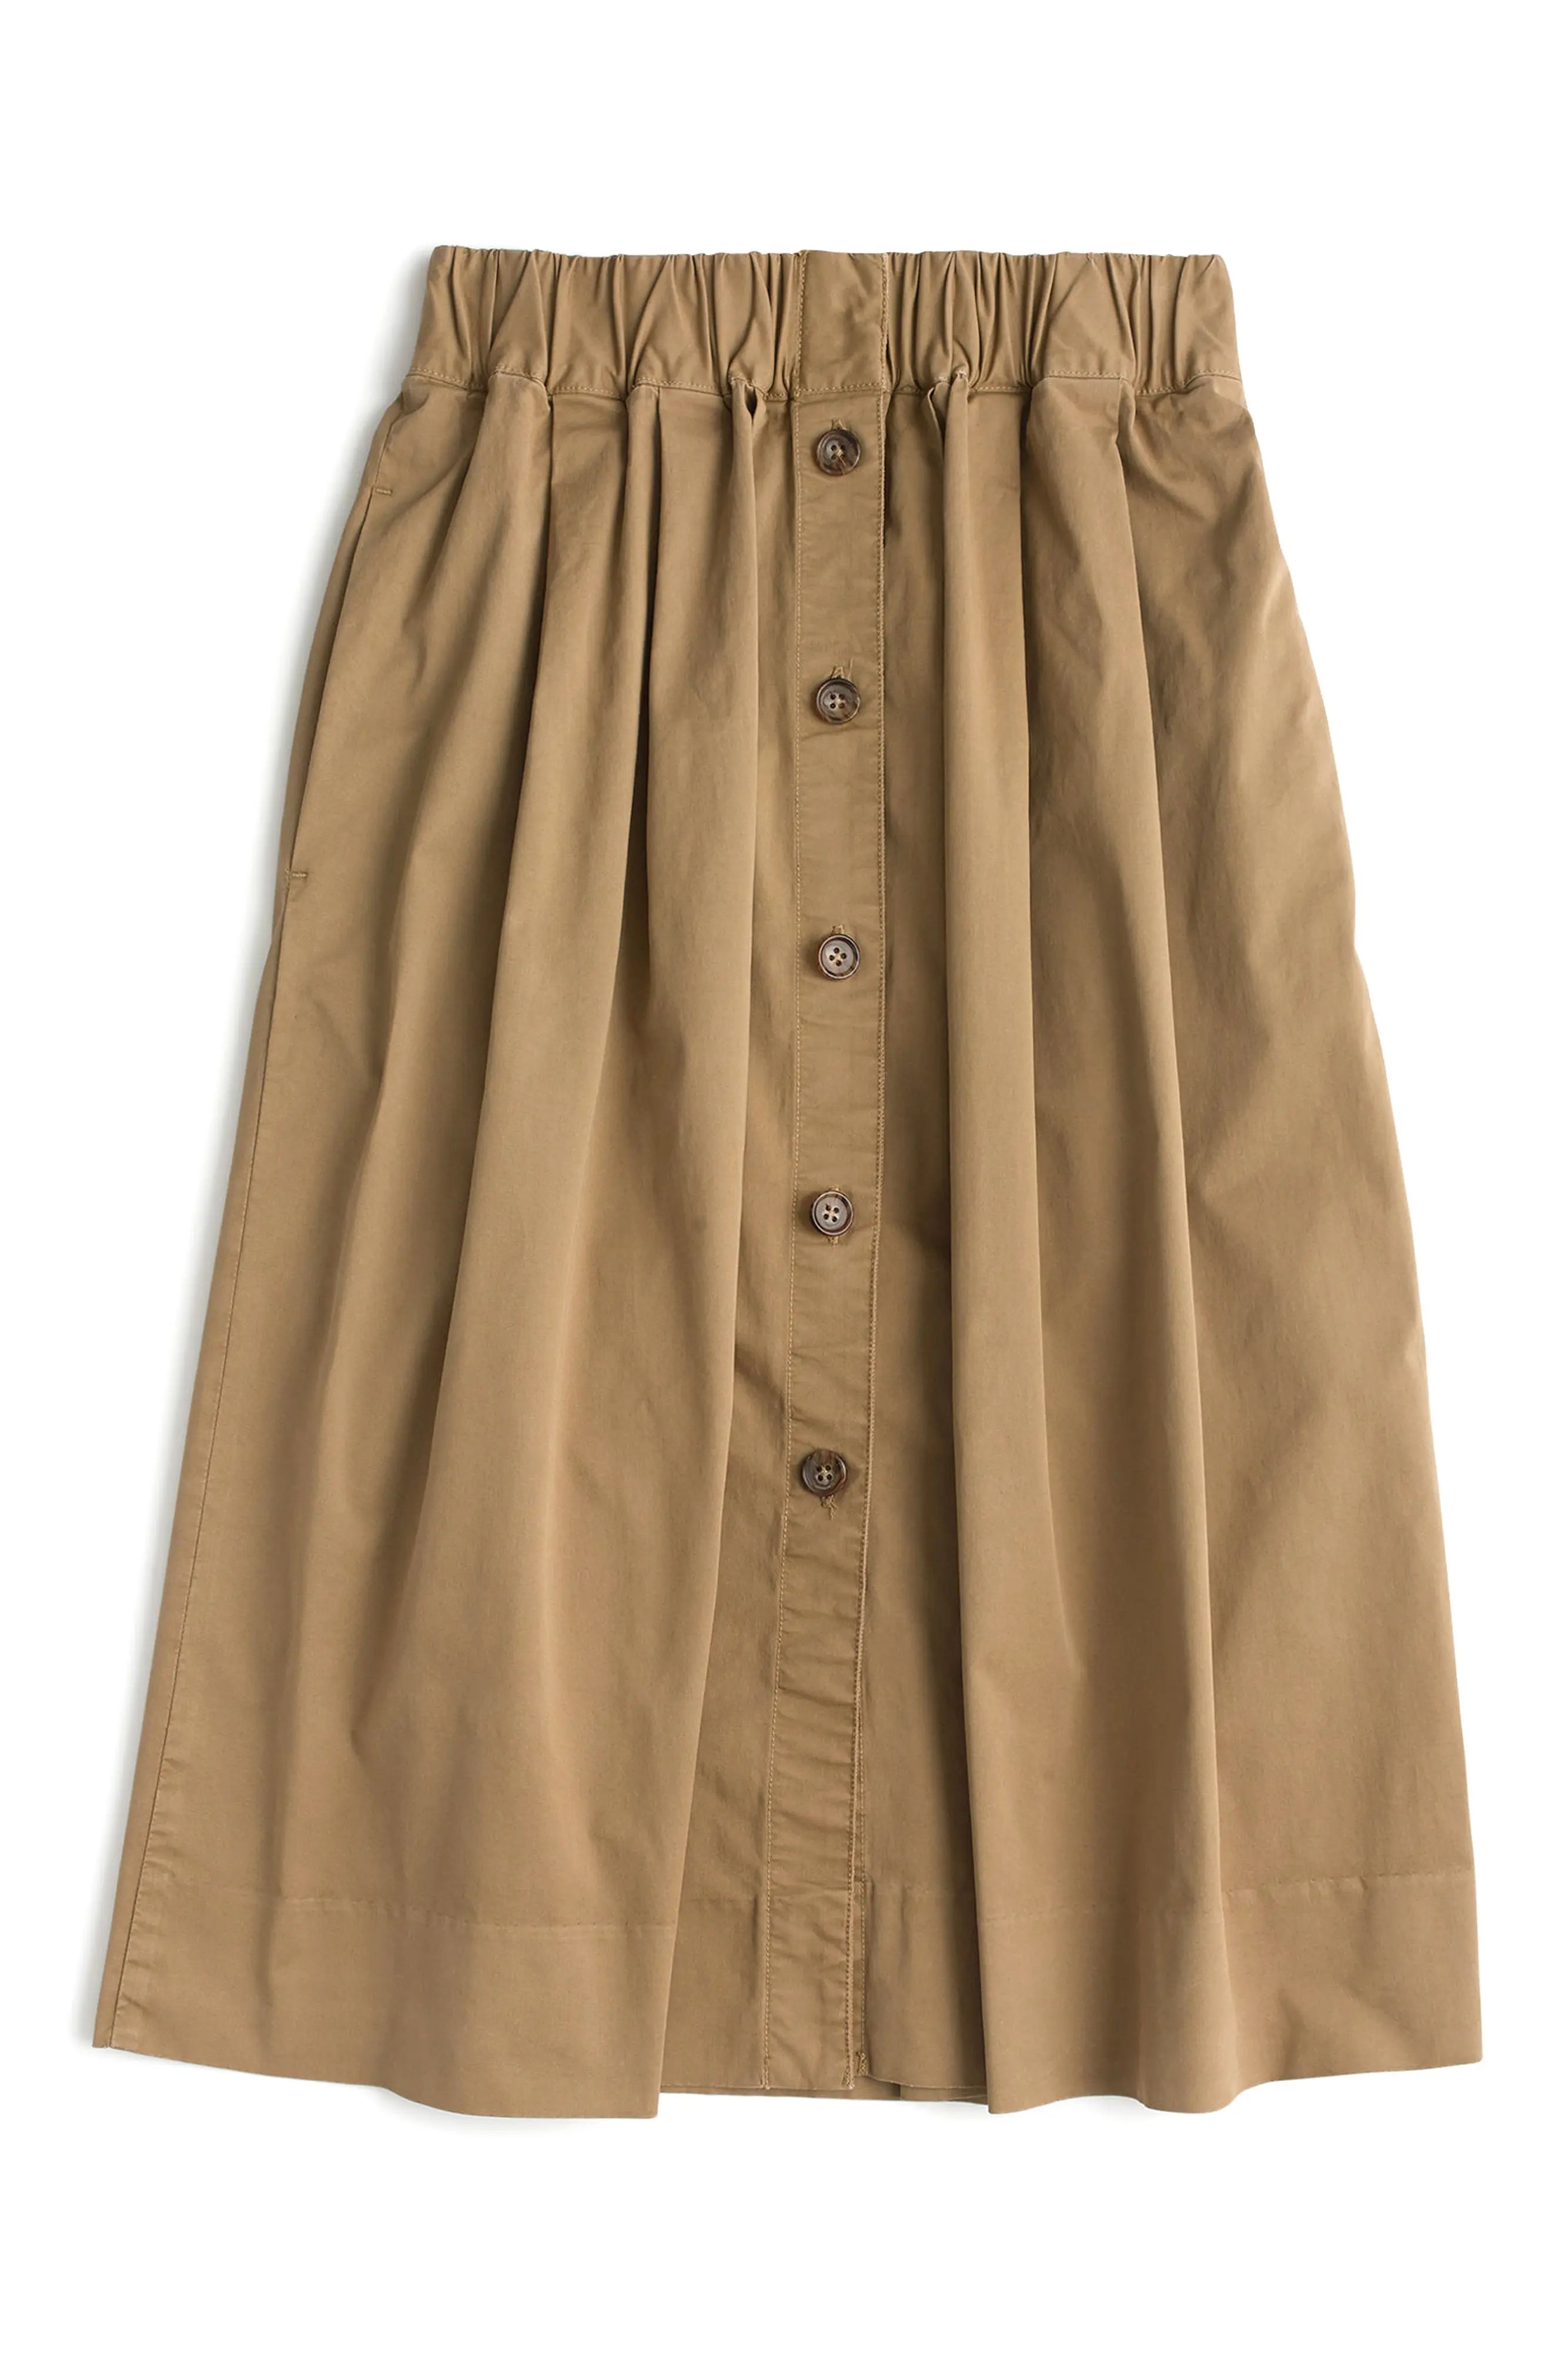 J.Crew Button Front Chino Skirt | Nordstrom